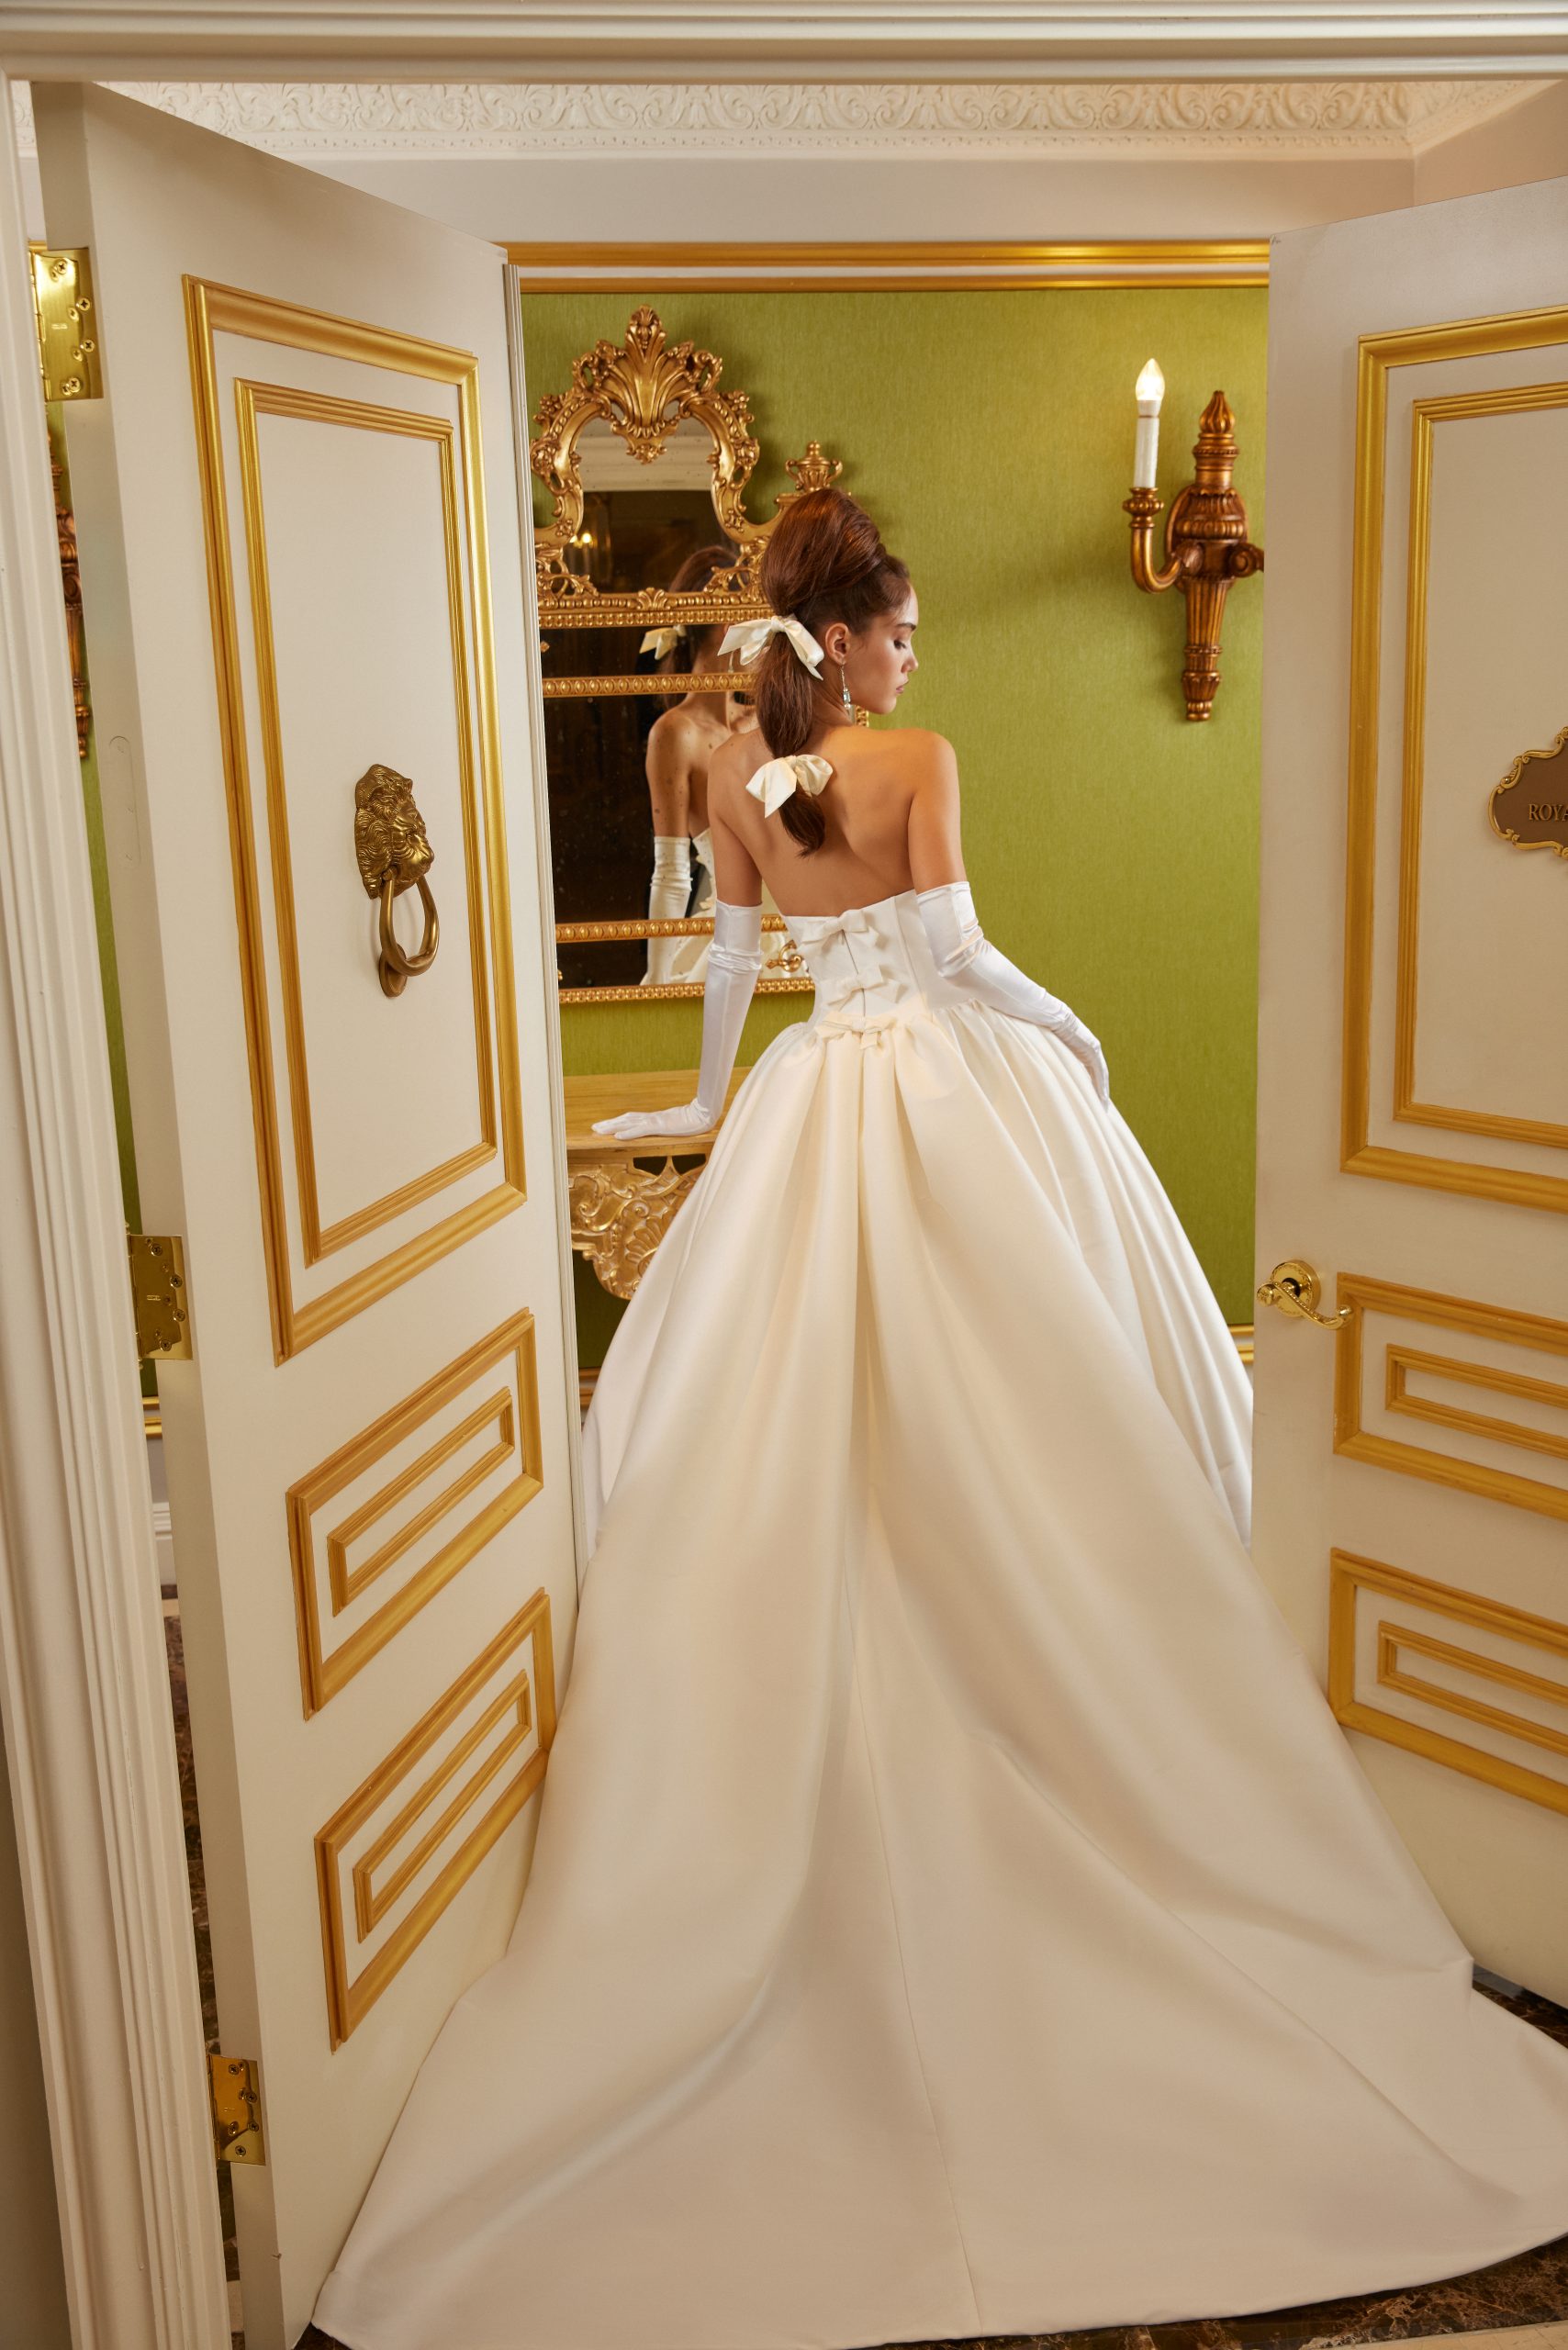 Timeless Drop-Waist Ball Gown With Bow by Sareh Nouri - Image 2